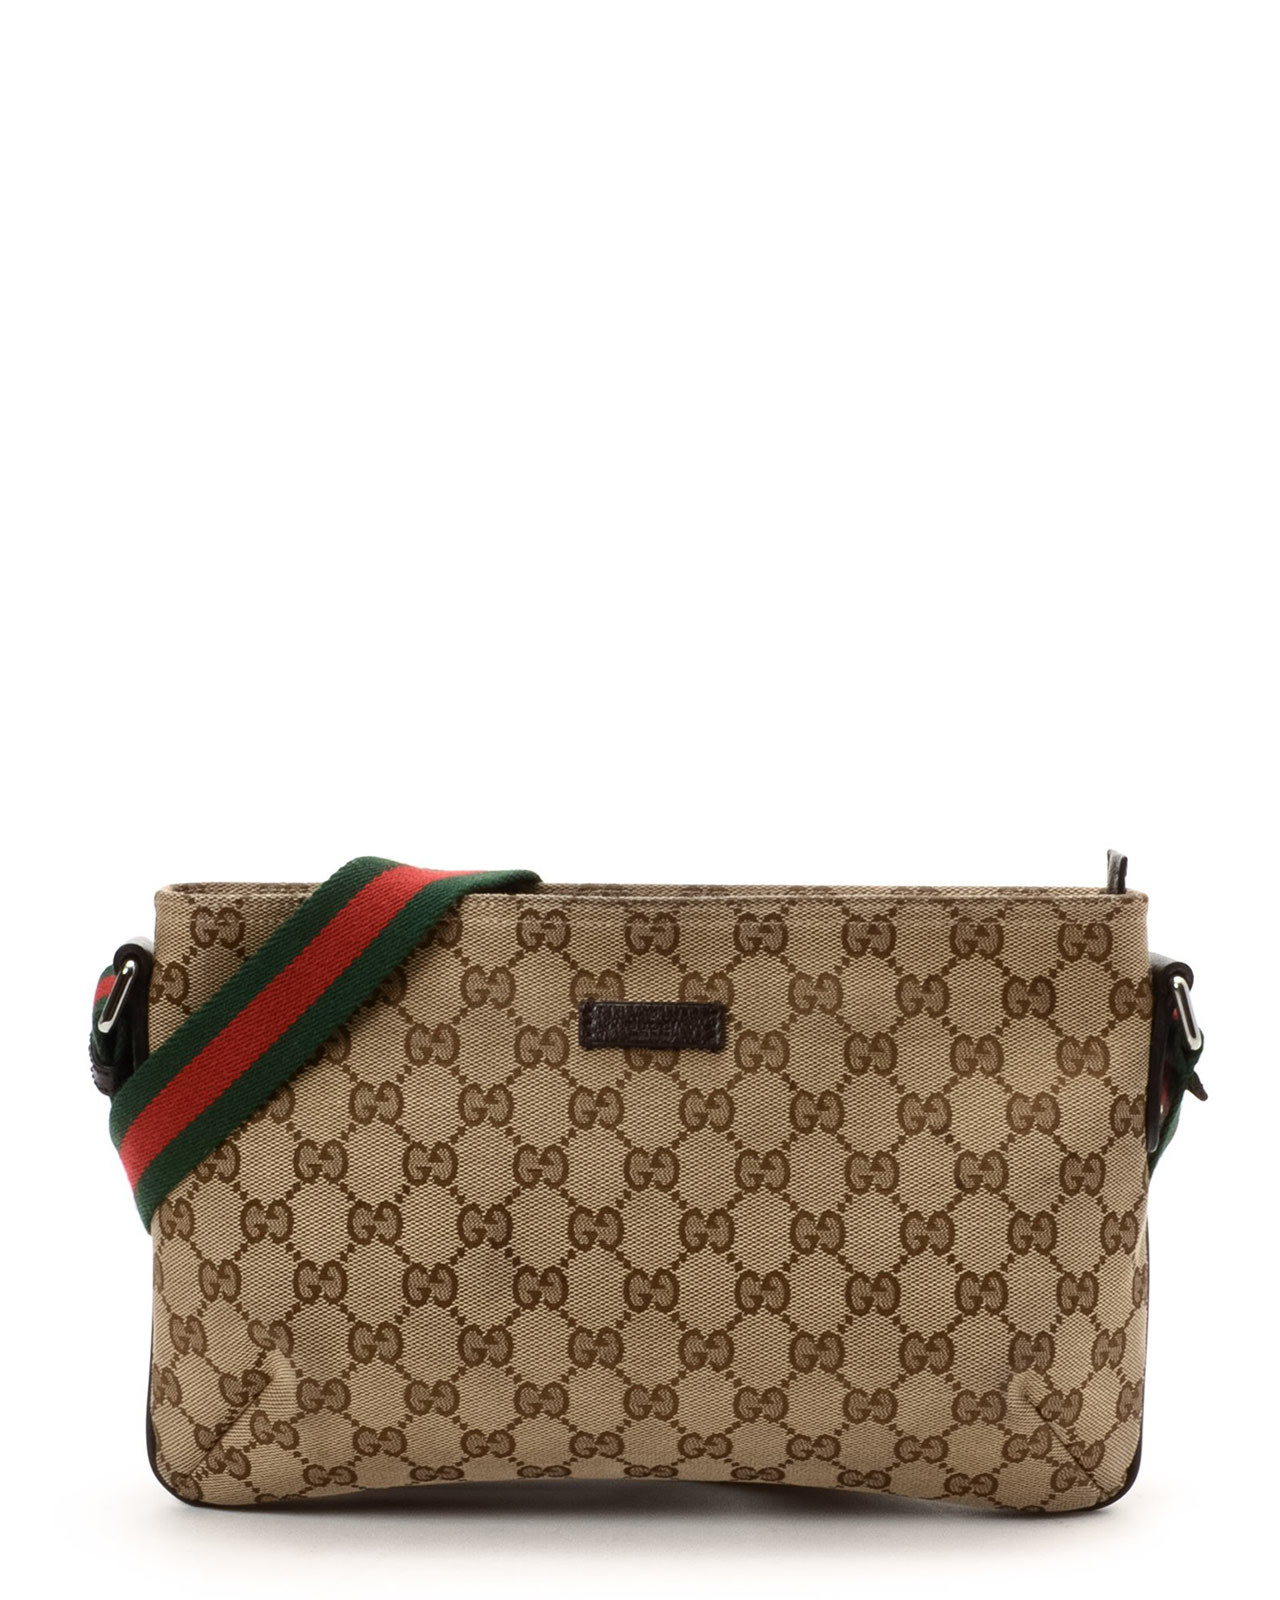 Gucci Crossbody Handbags Sale | Confederated Tribes of the Umatilla Indian Reservation